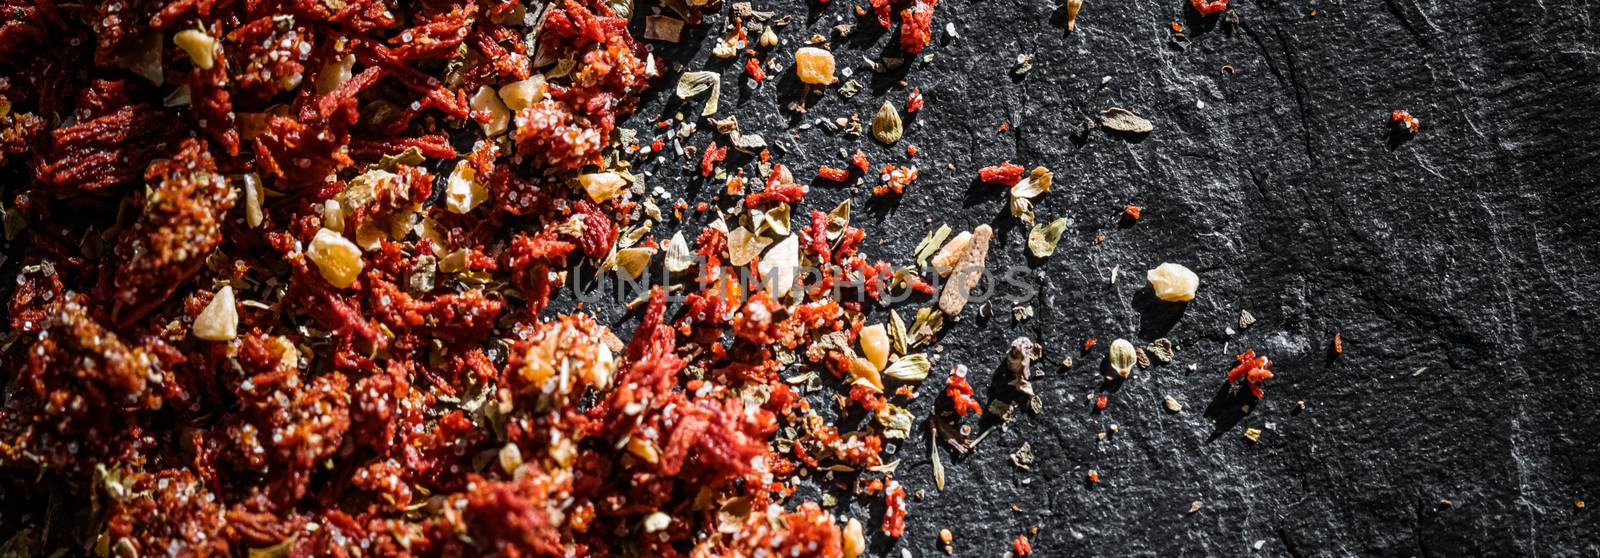 Dried tomato and chili pepper closeup on luxury stone background as flat lay, dry food spices and recipe ingredient by Anneleven